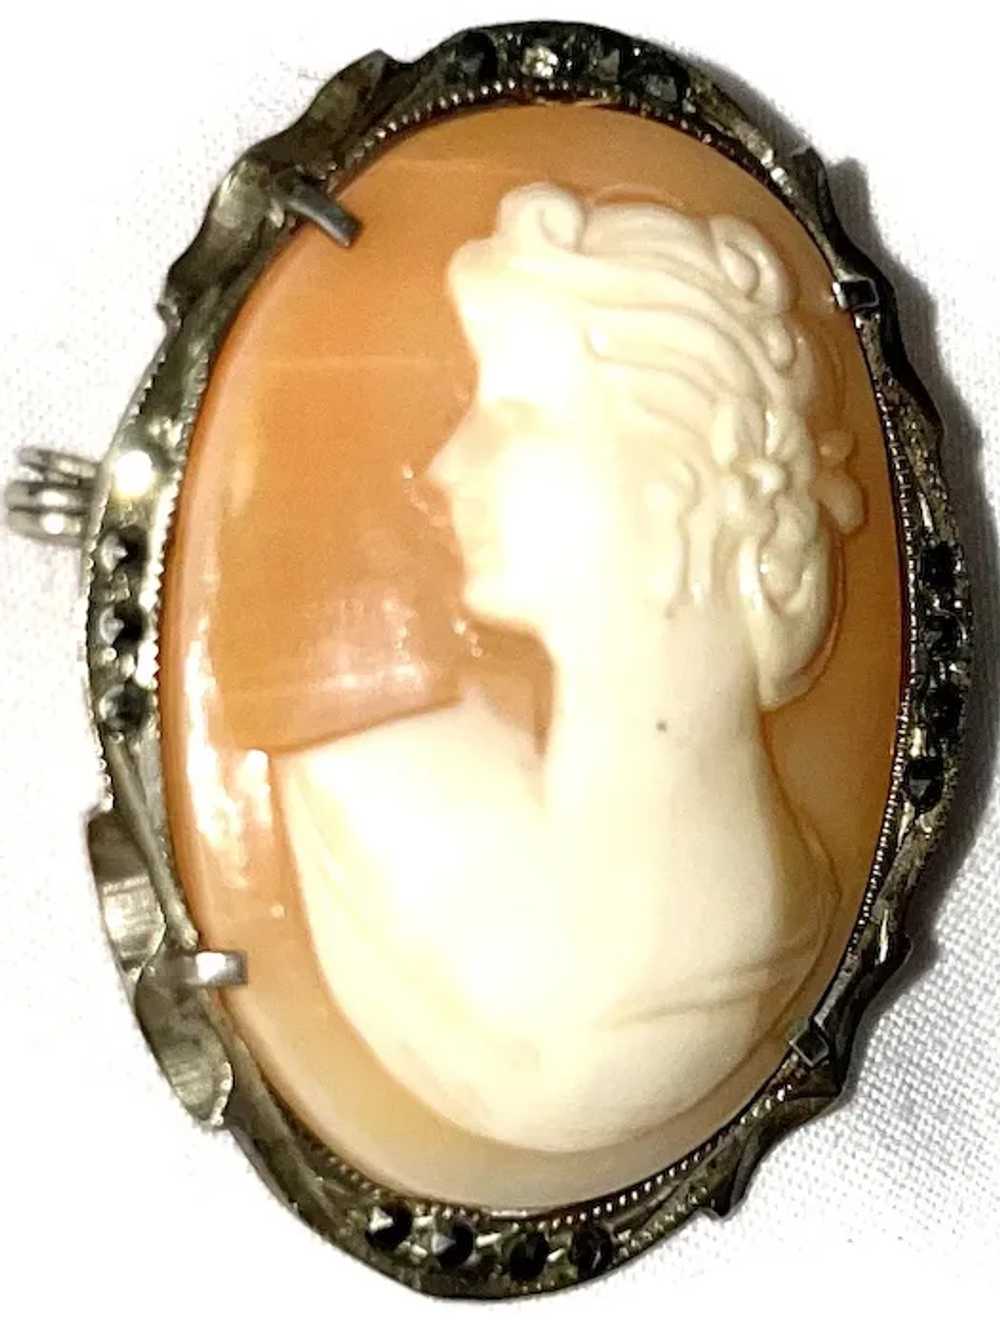 Shell Cameo Marcasite Brooch or Pendant - image 4